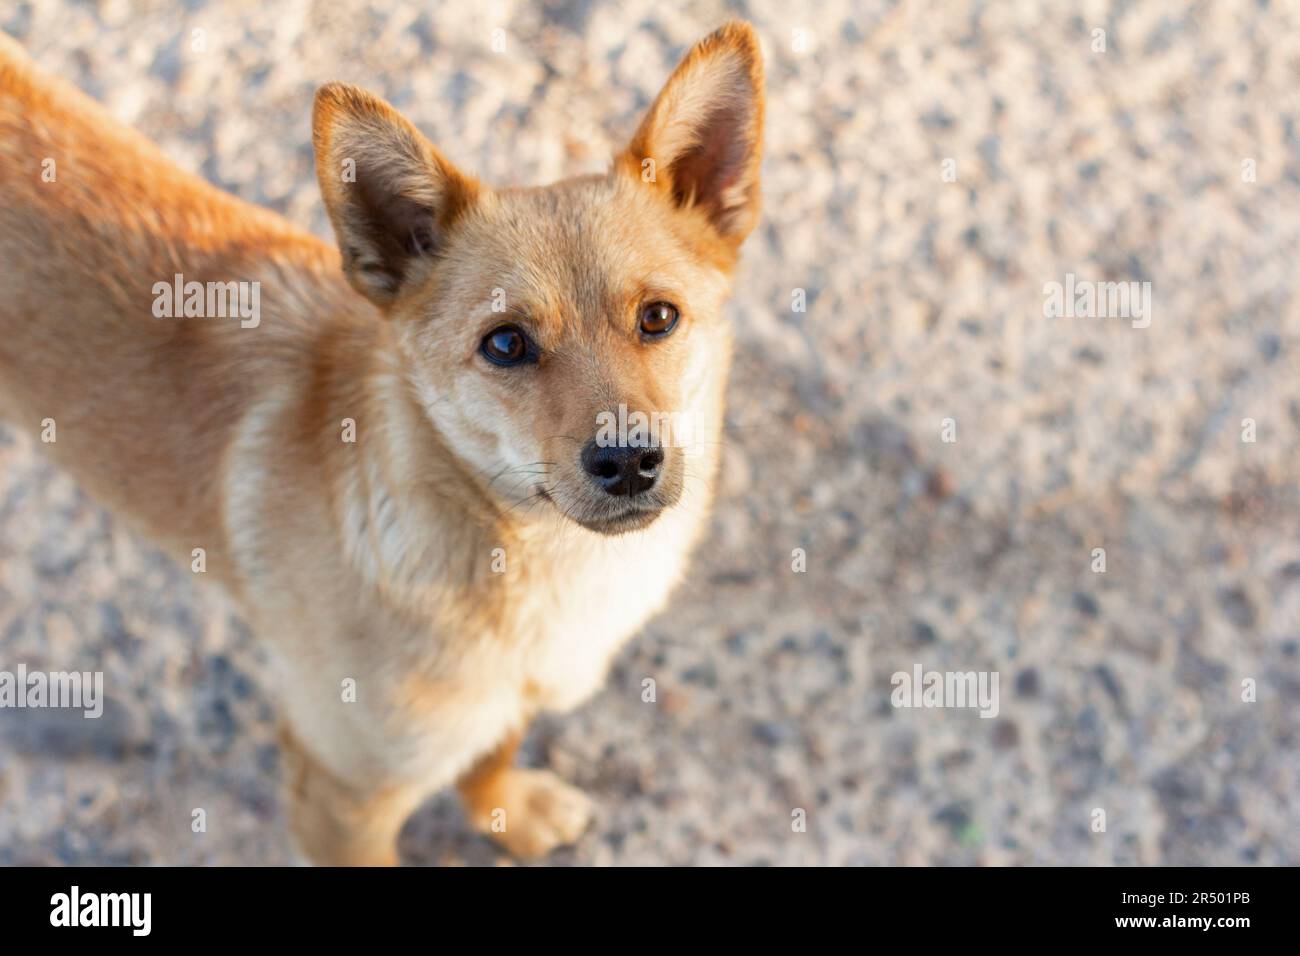 A small red-haired dog looks expectantly at the camera Stock Photo